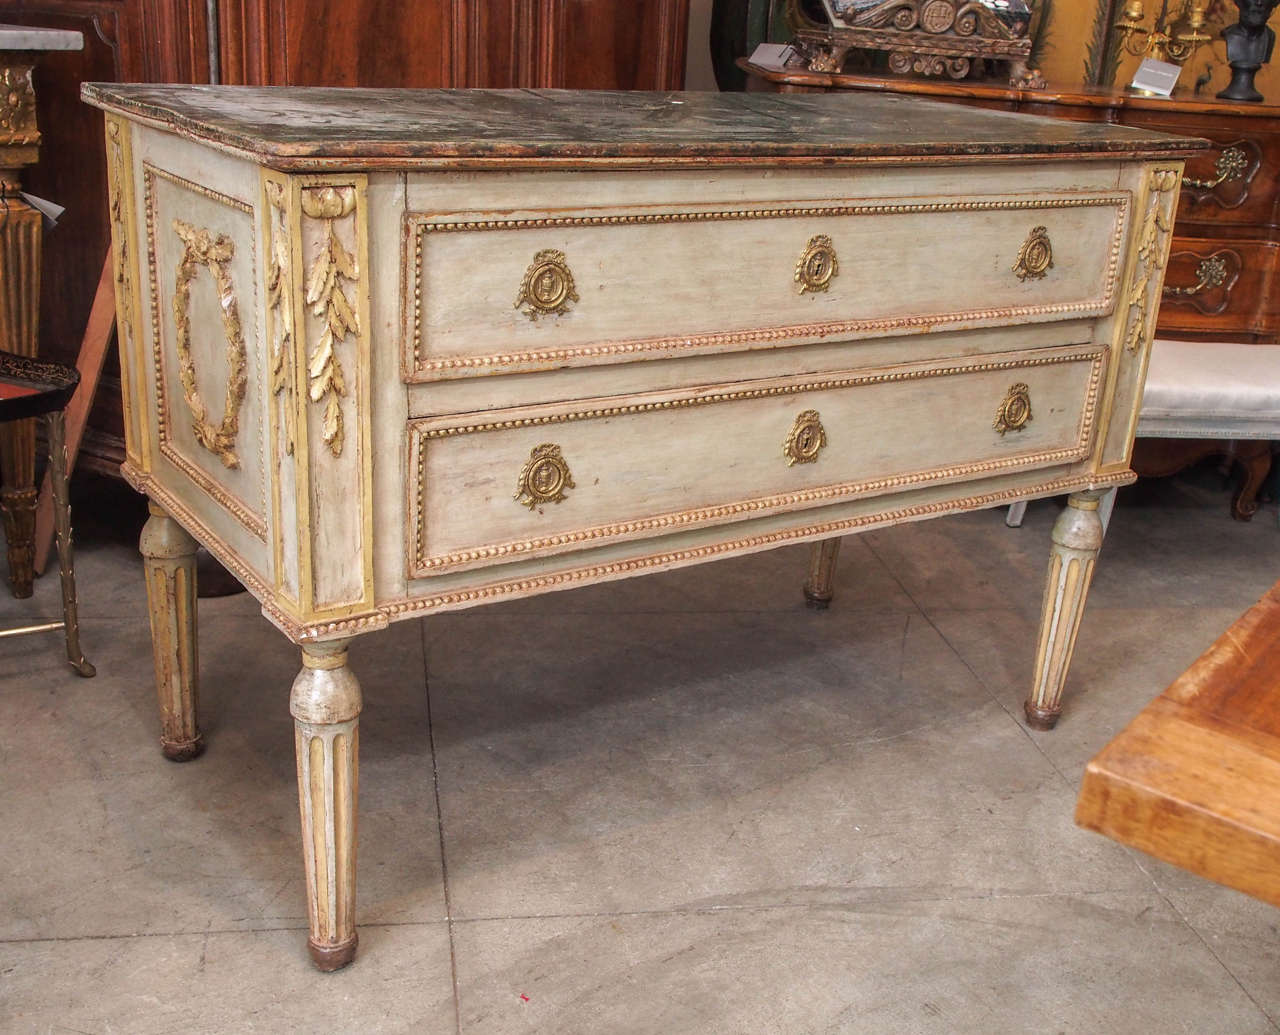 18th century painted, gilded and carved Italian commode.